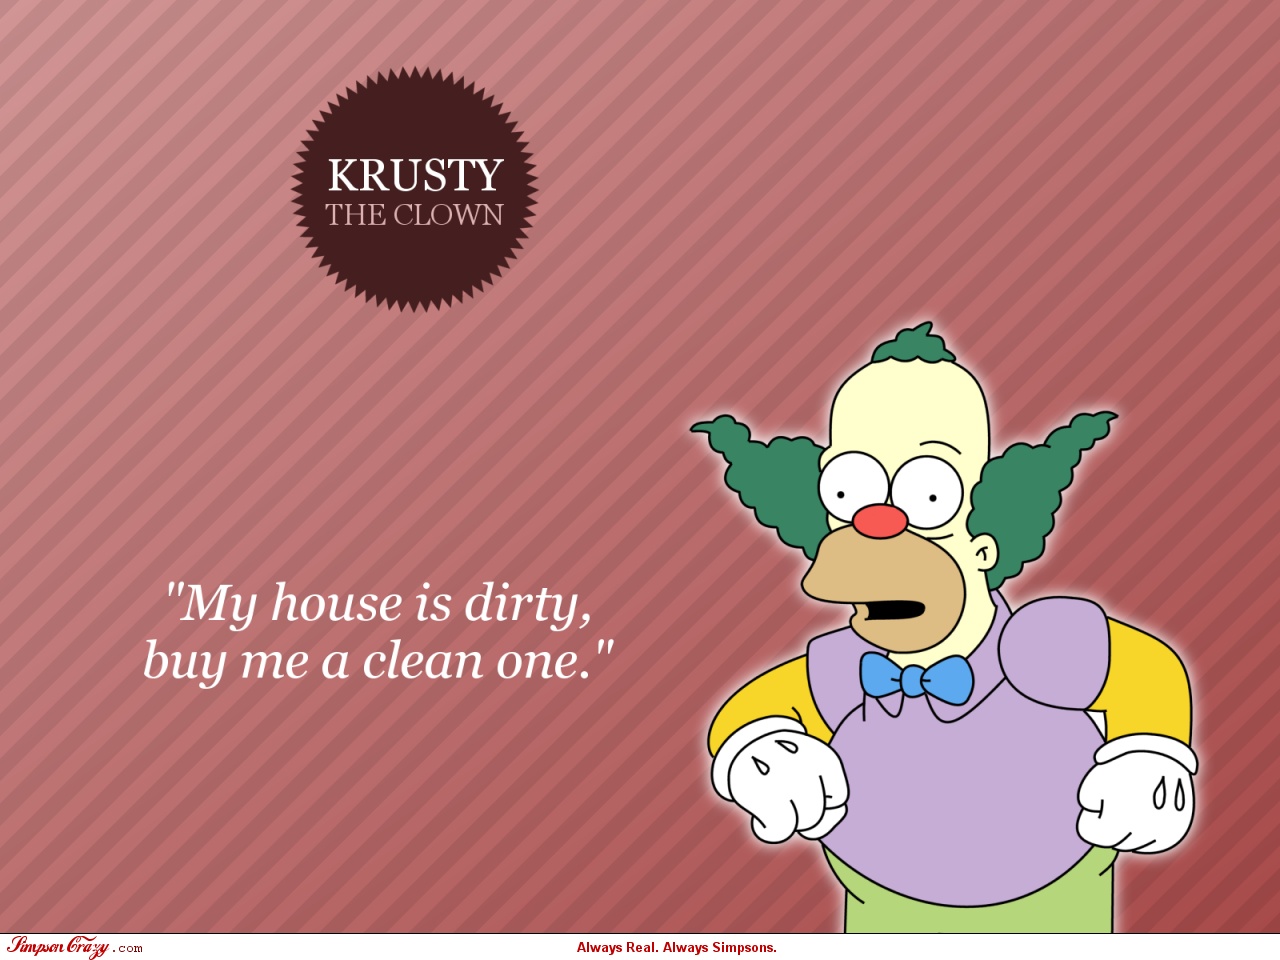 tv show, krusty the clown, the simpsons